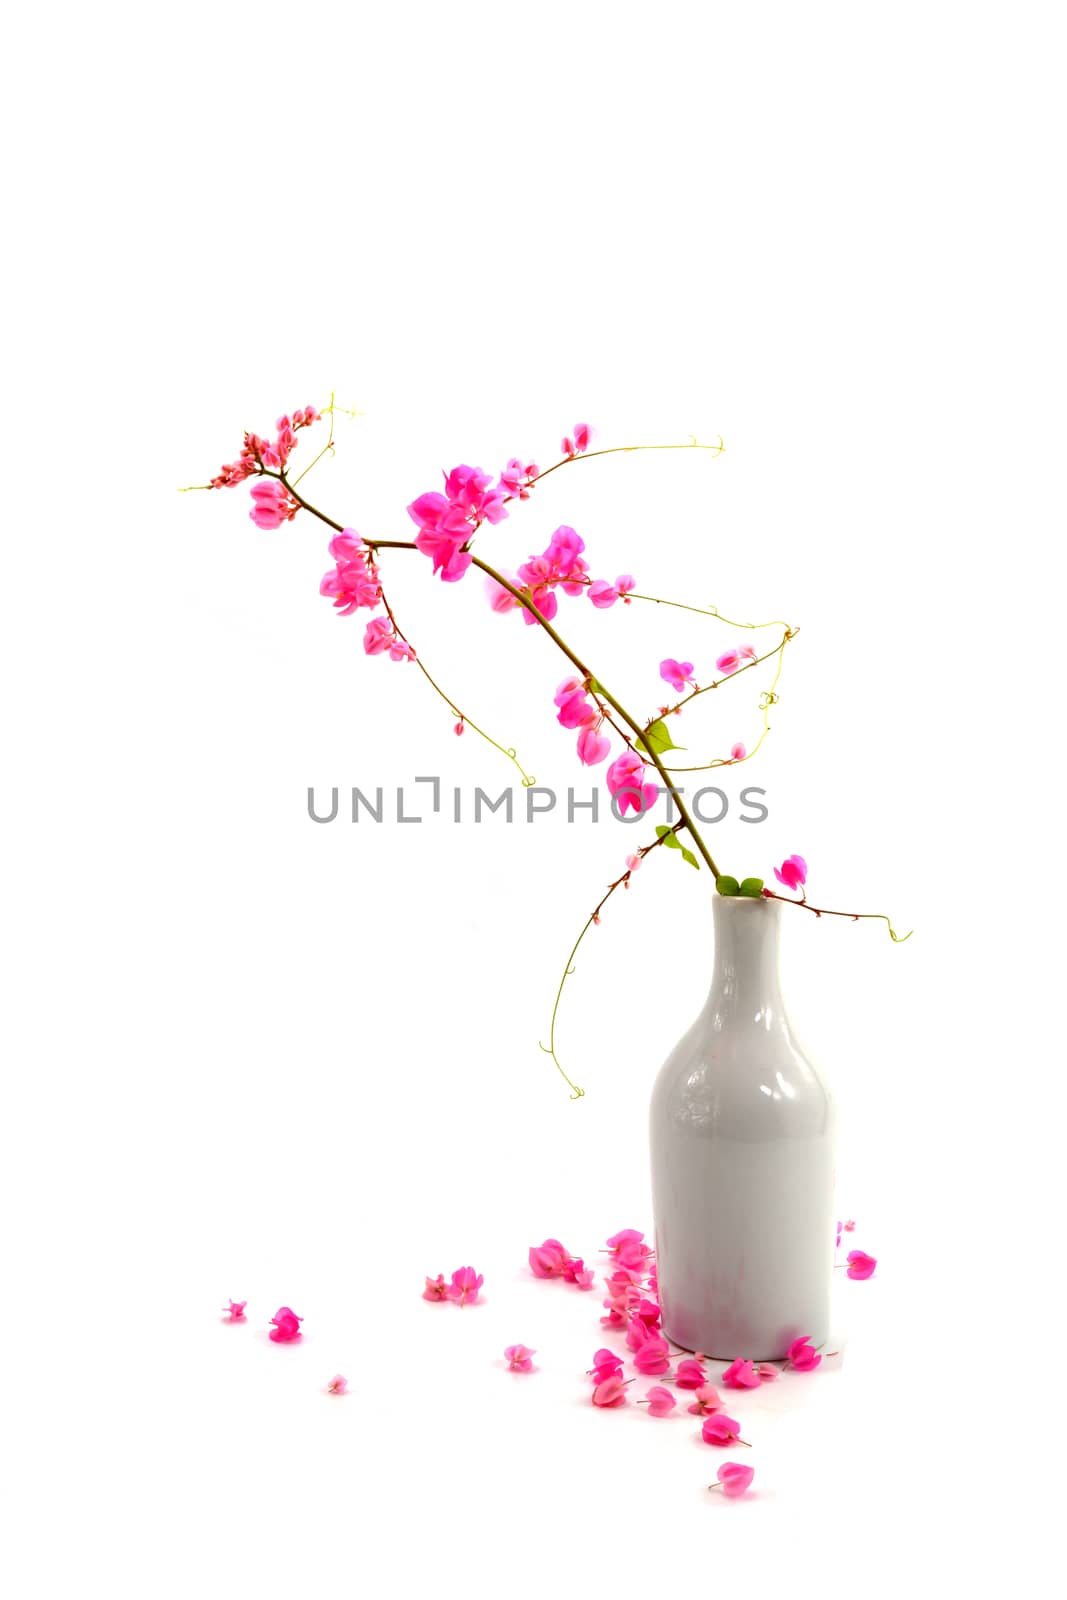 Pink flower on a white background. (Coral Vine, Mexican Creeper, by Noppharat_th